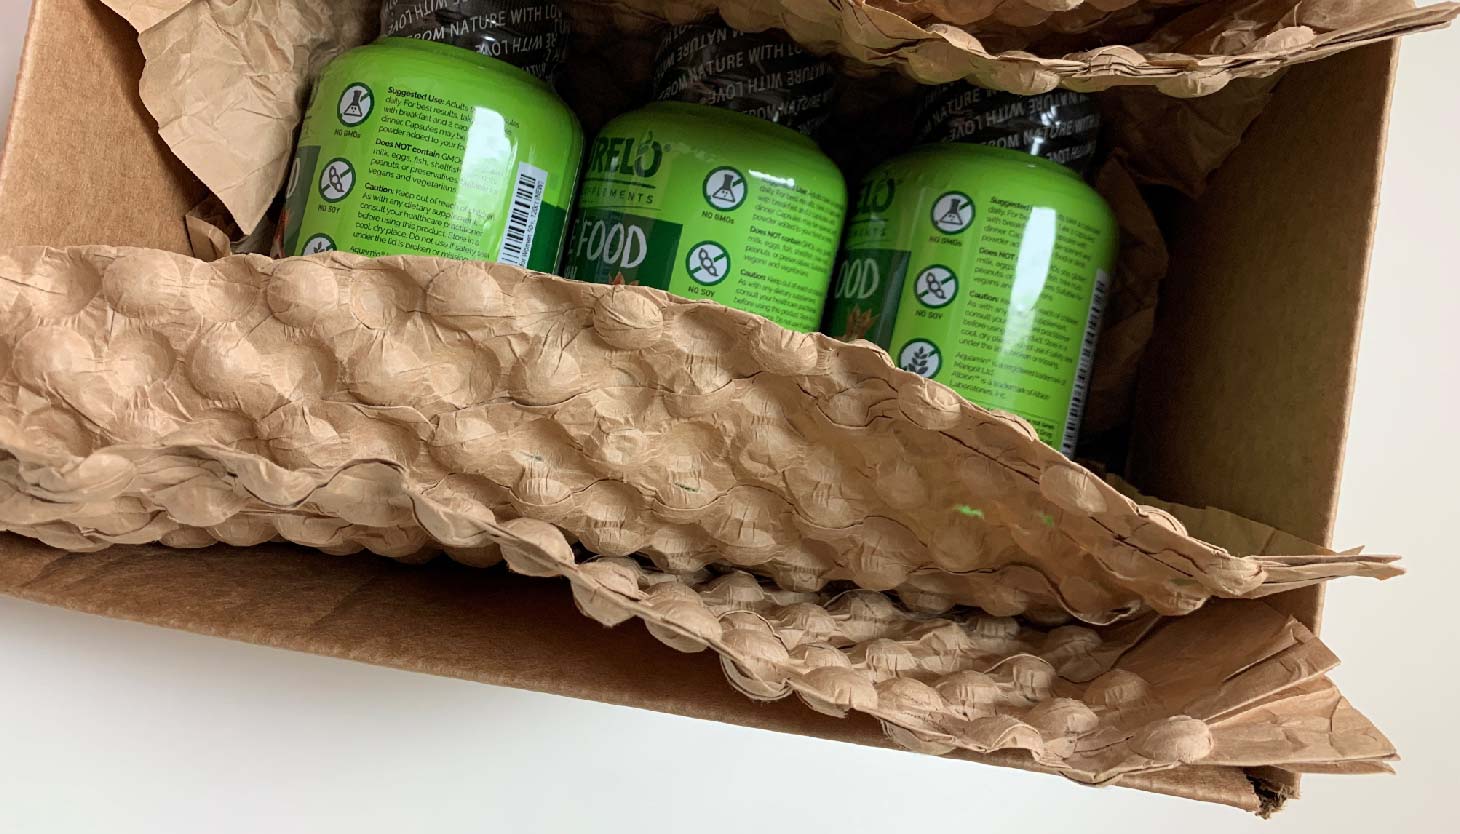 6 Tips to Packaging Products More Sustainably